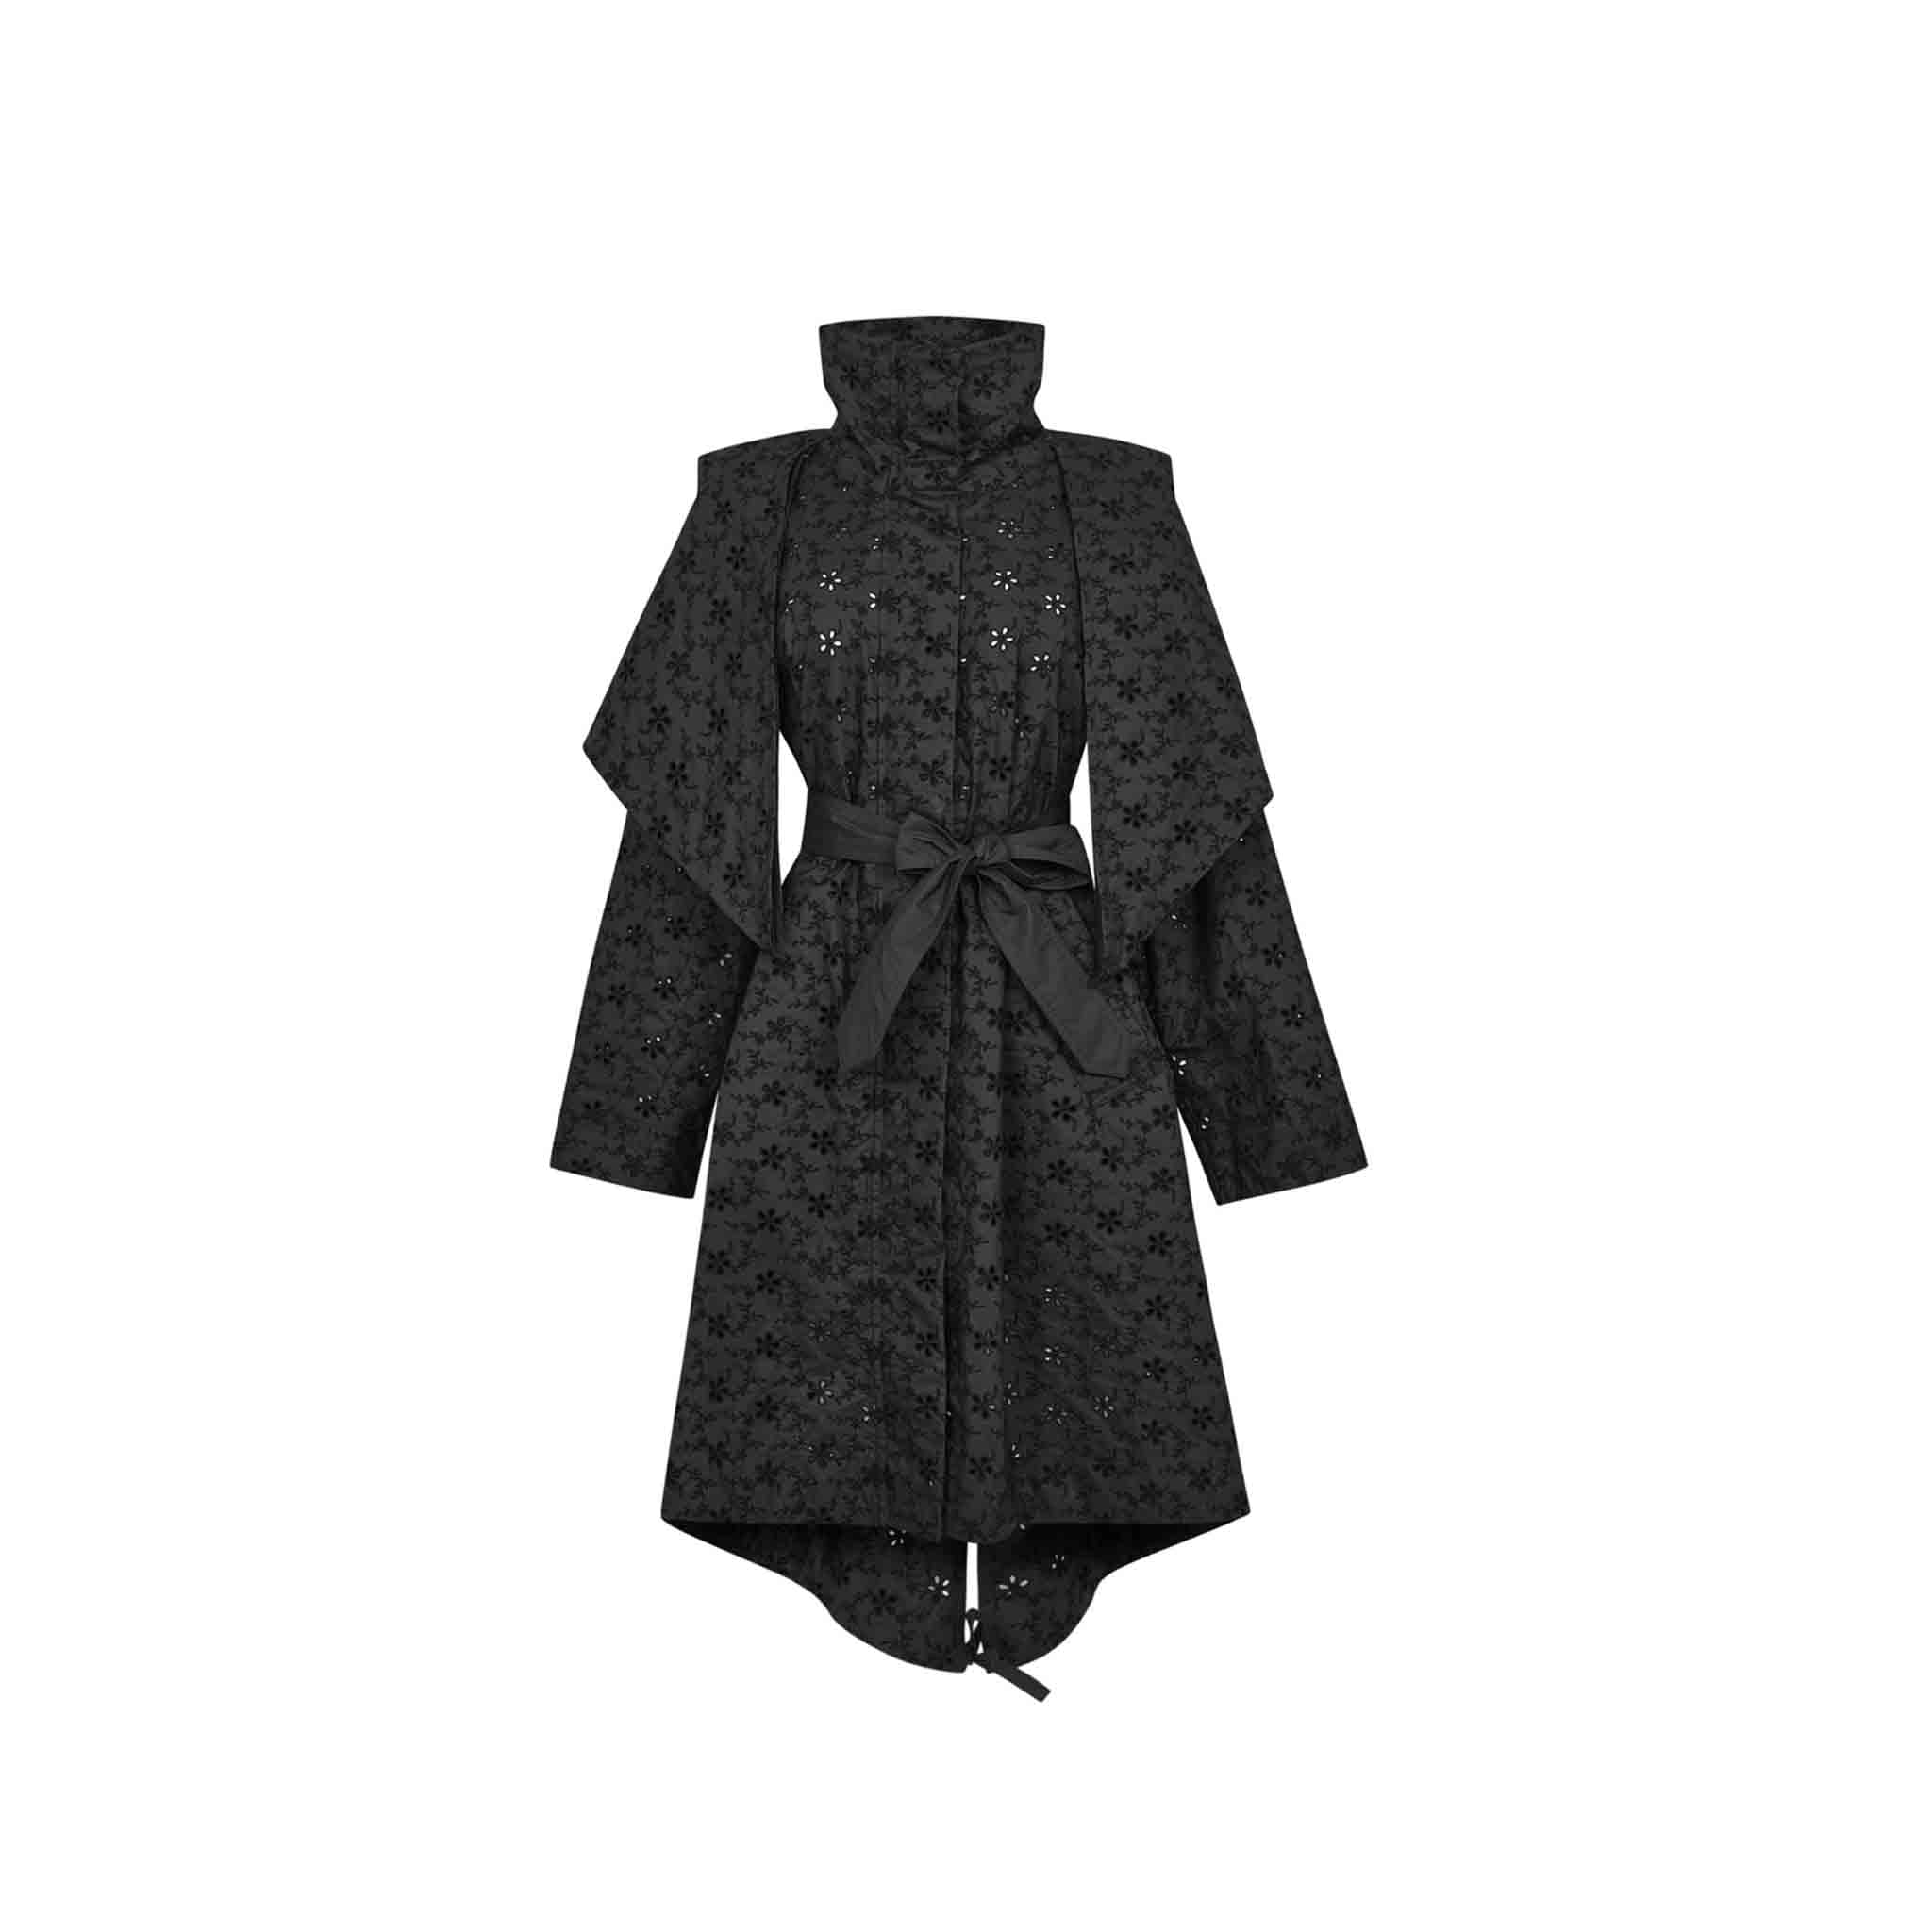 This parka from Moncler Genius's 2 Moncler 1952 collection is made from pure cotton in black. It features broderie anglaise florals and a tonal belt cinching the waist to create an hourglass silhouette. Moncler Genius 2 MONCLER 1952 broderie anglaise cotton parka.